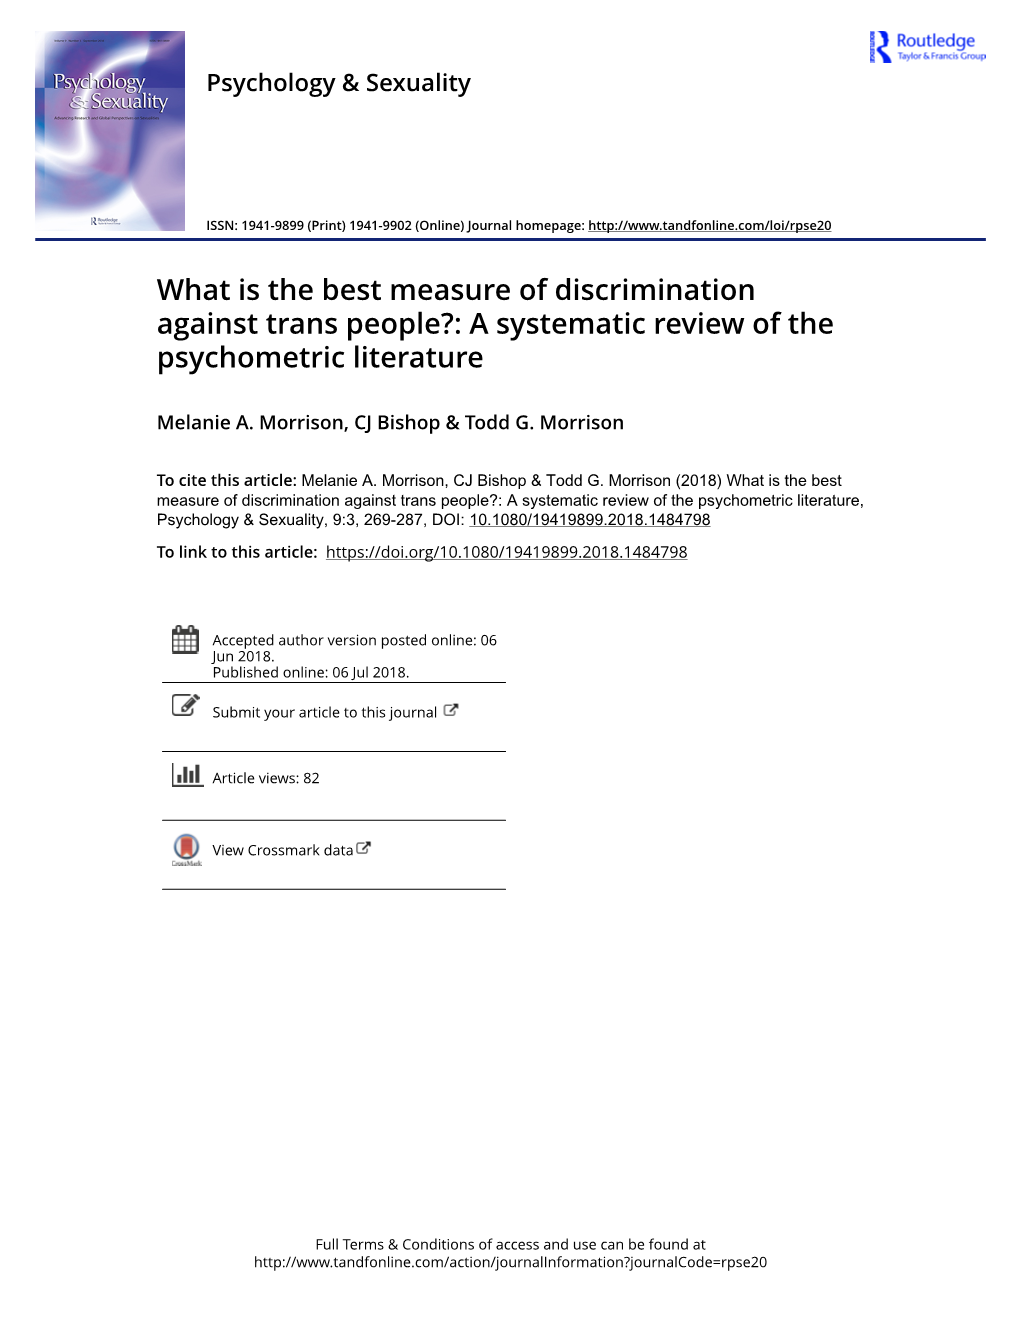 What Is the Best Measure of Discrimination Against Trans People?: a Systematic Review of the Psychometric Literature